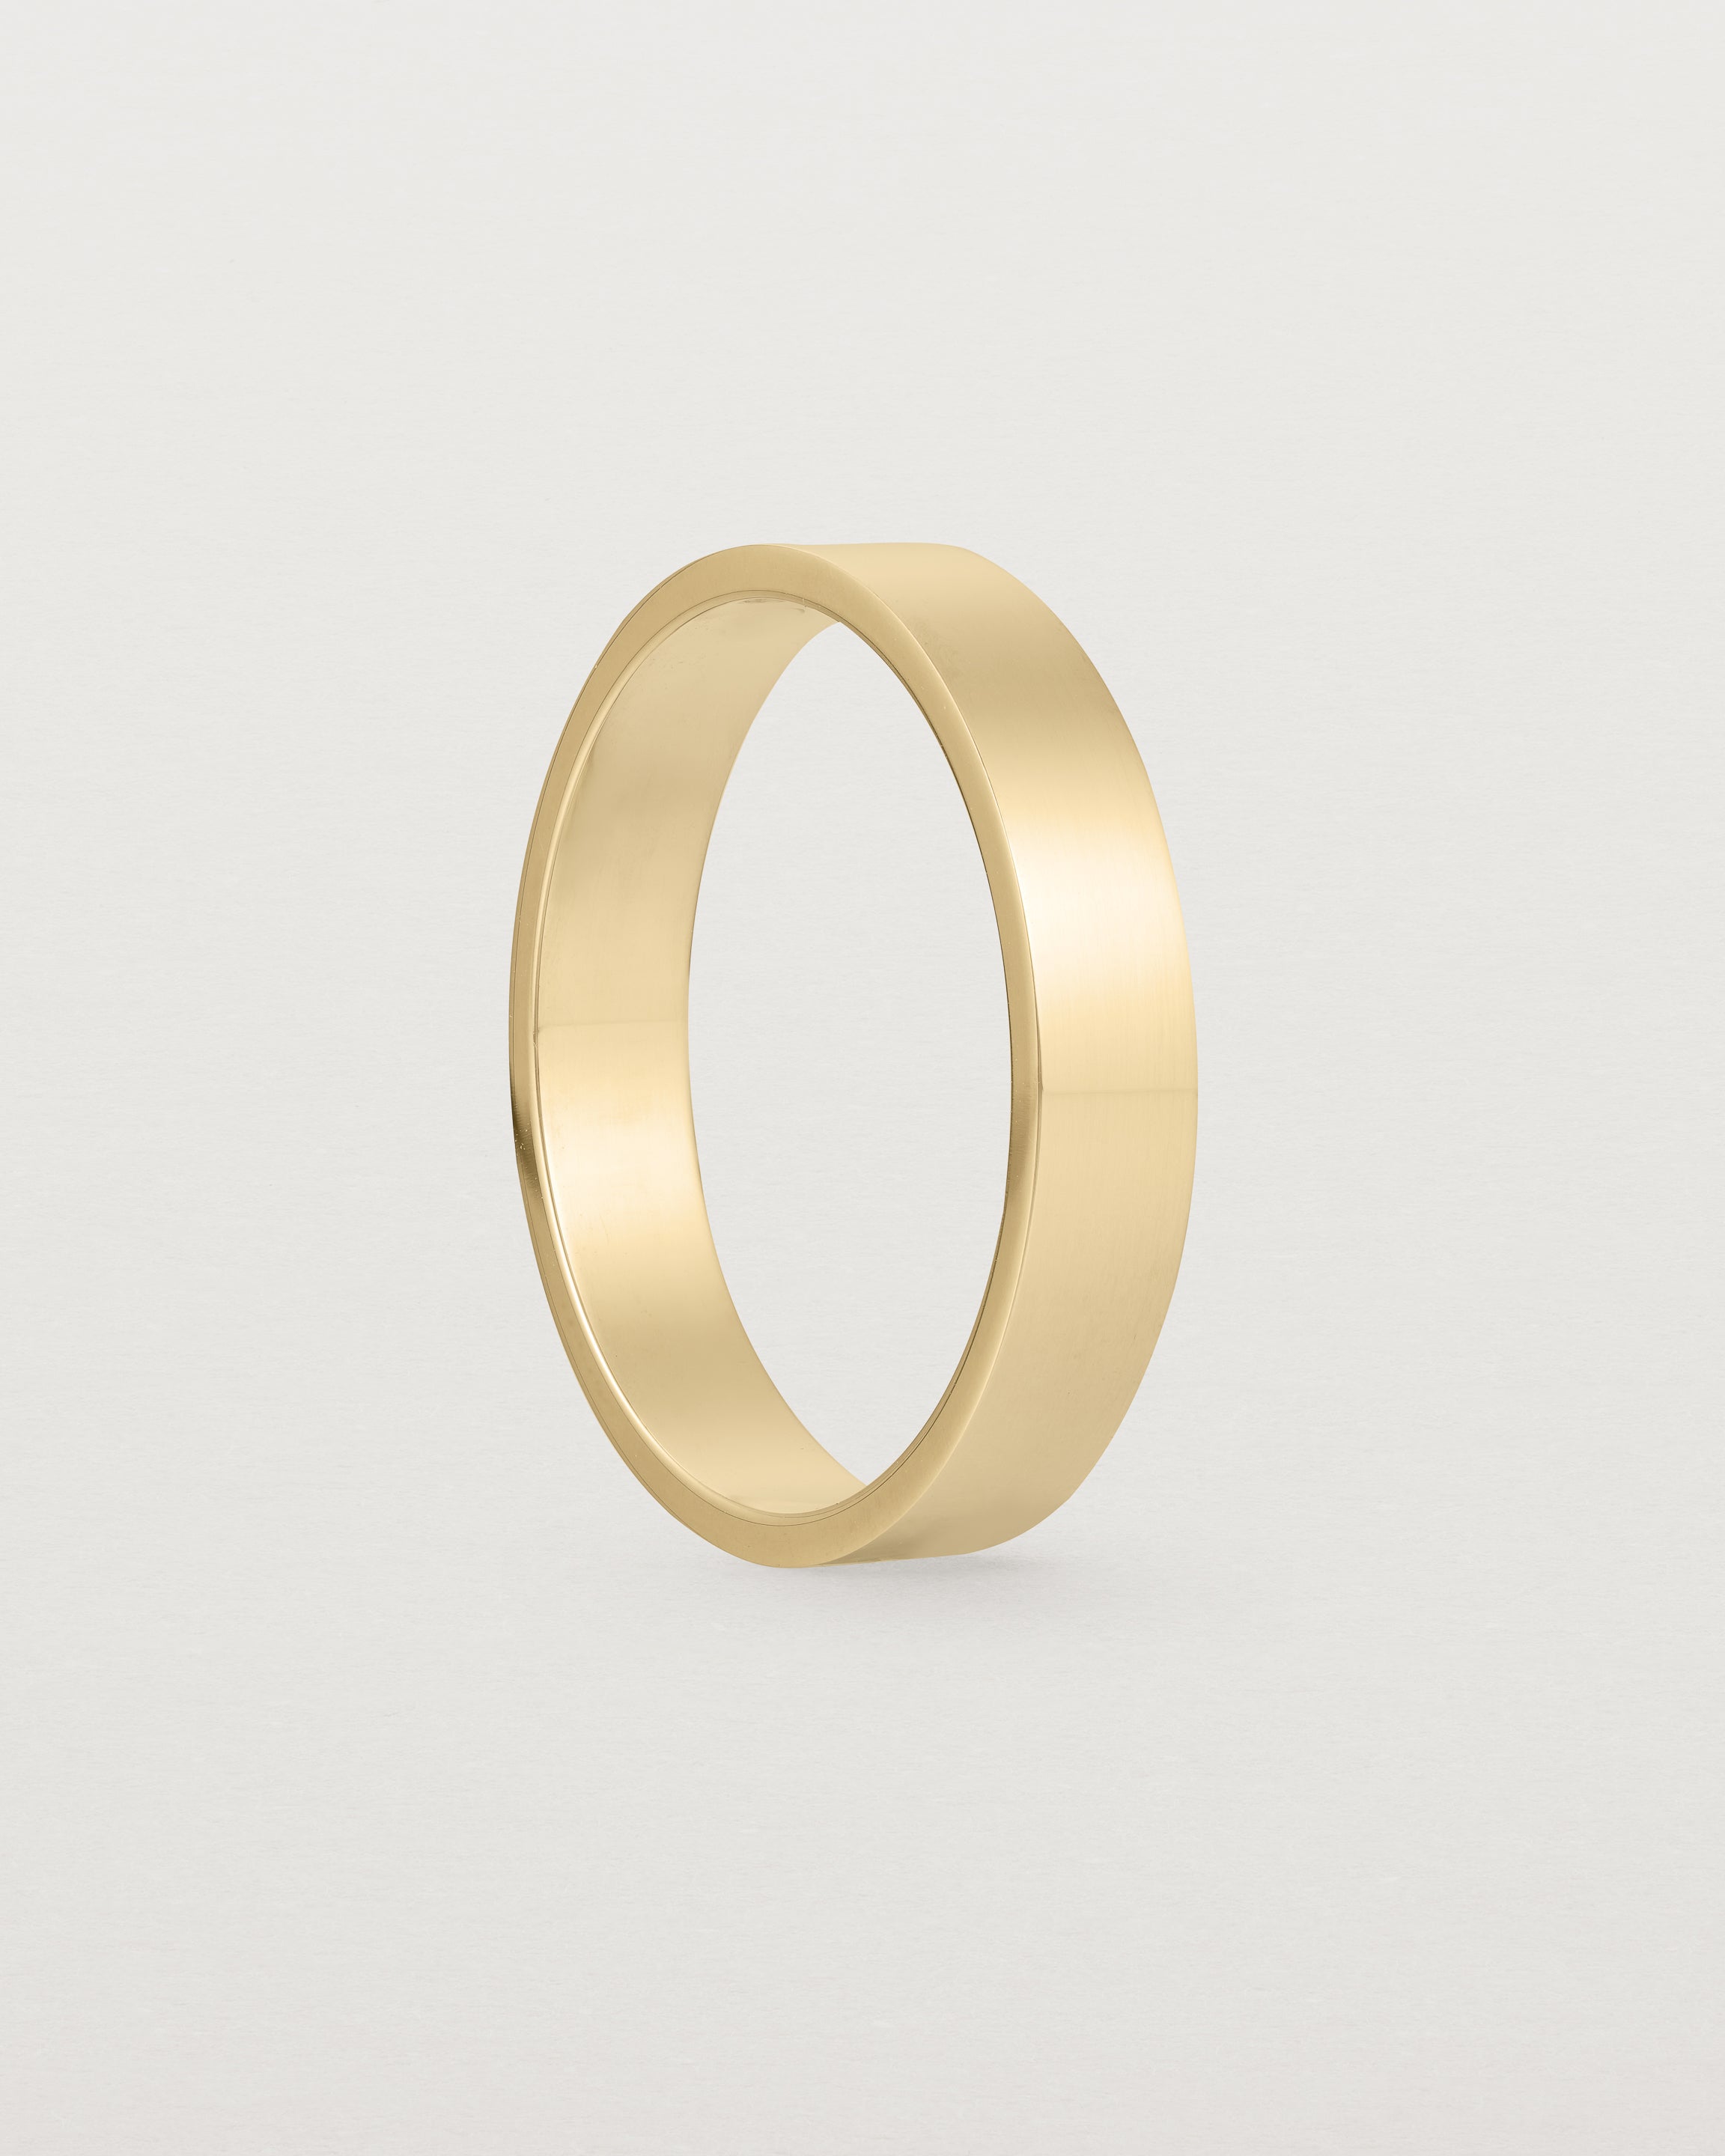 The side profile our square, flat 4mm profile wedding band crafted in yellow gold